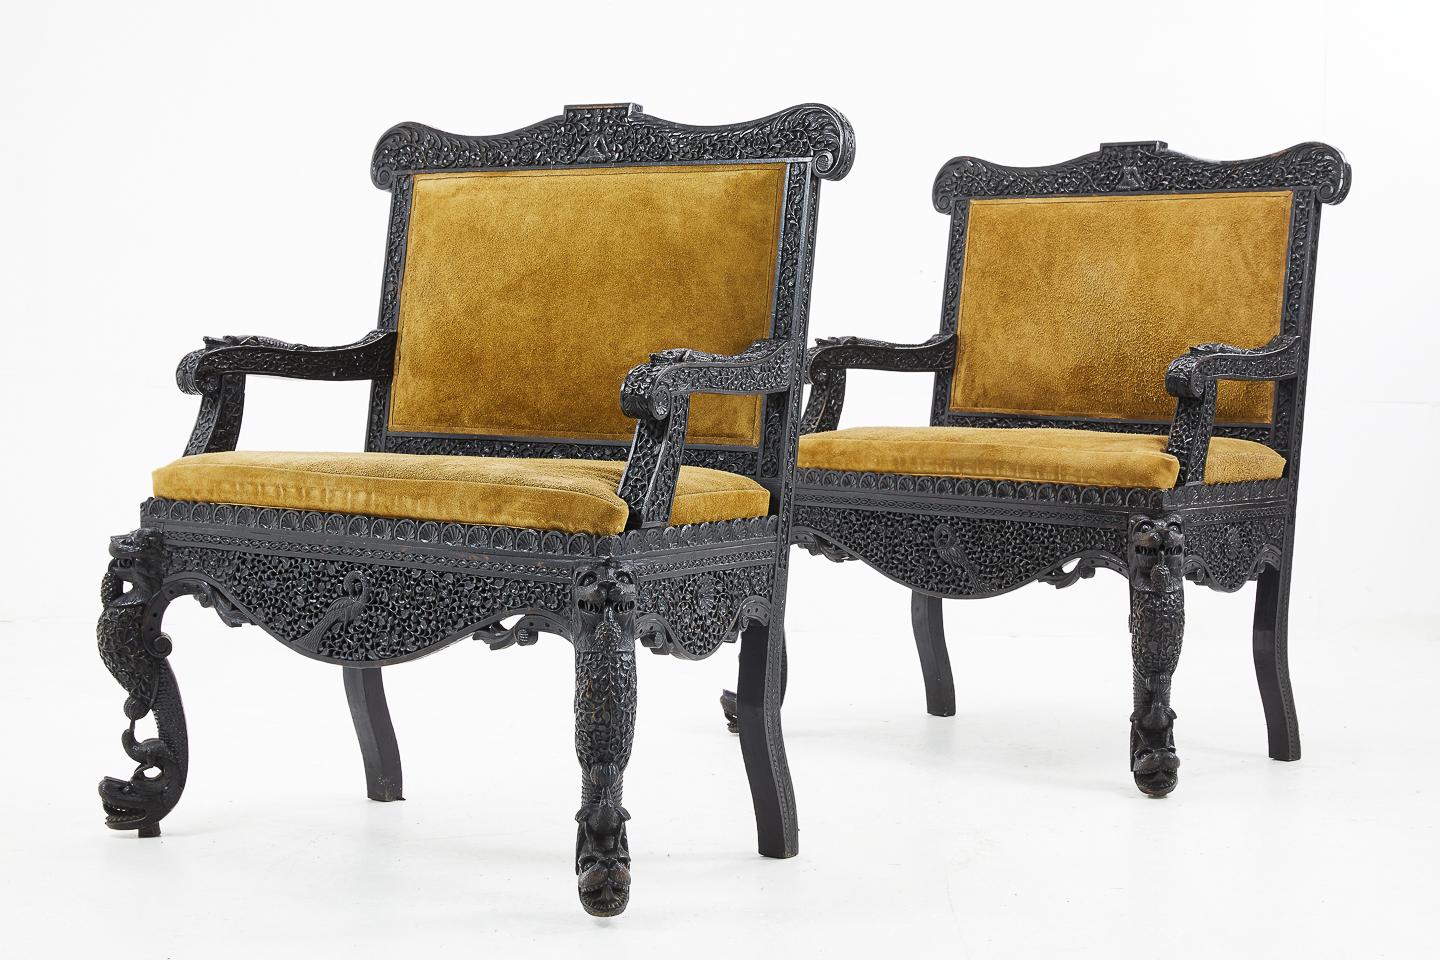 19th century unusual, Anglo Indian sofas upholstered in suede, circa 1900.